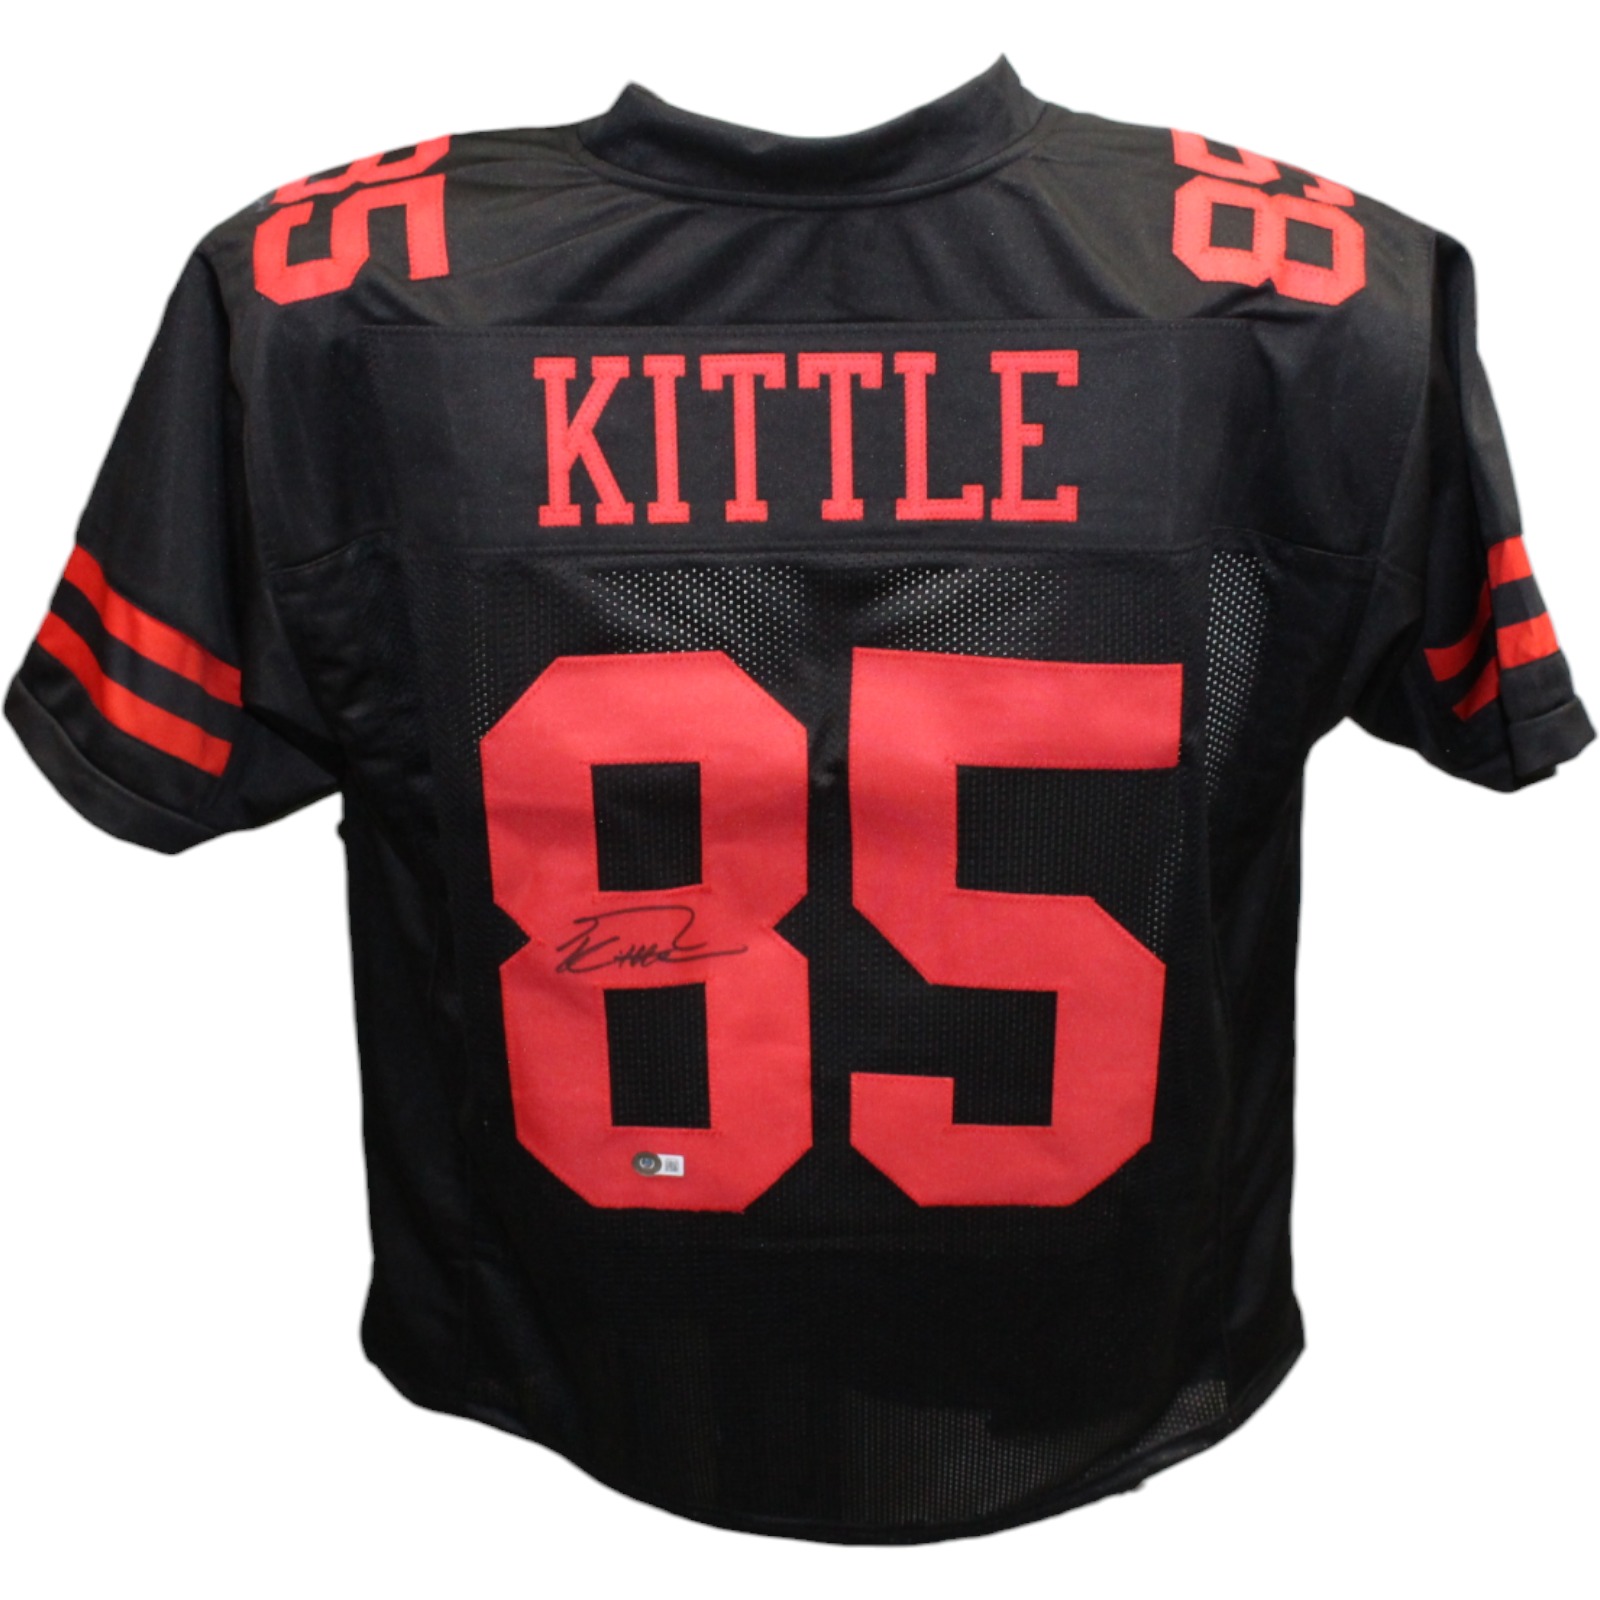 George Kittle Autographed/Signed Pro Style Black Jersey Beckett